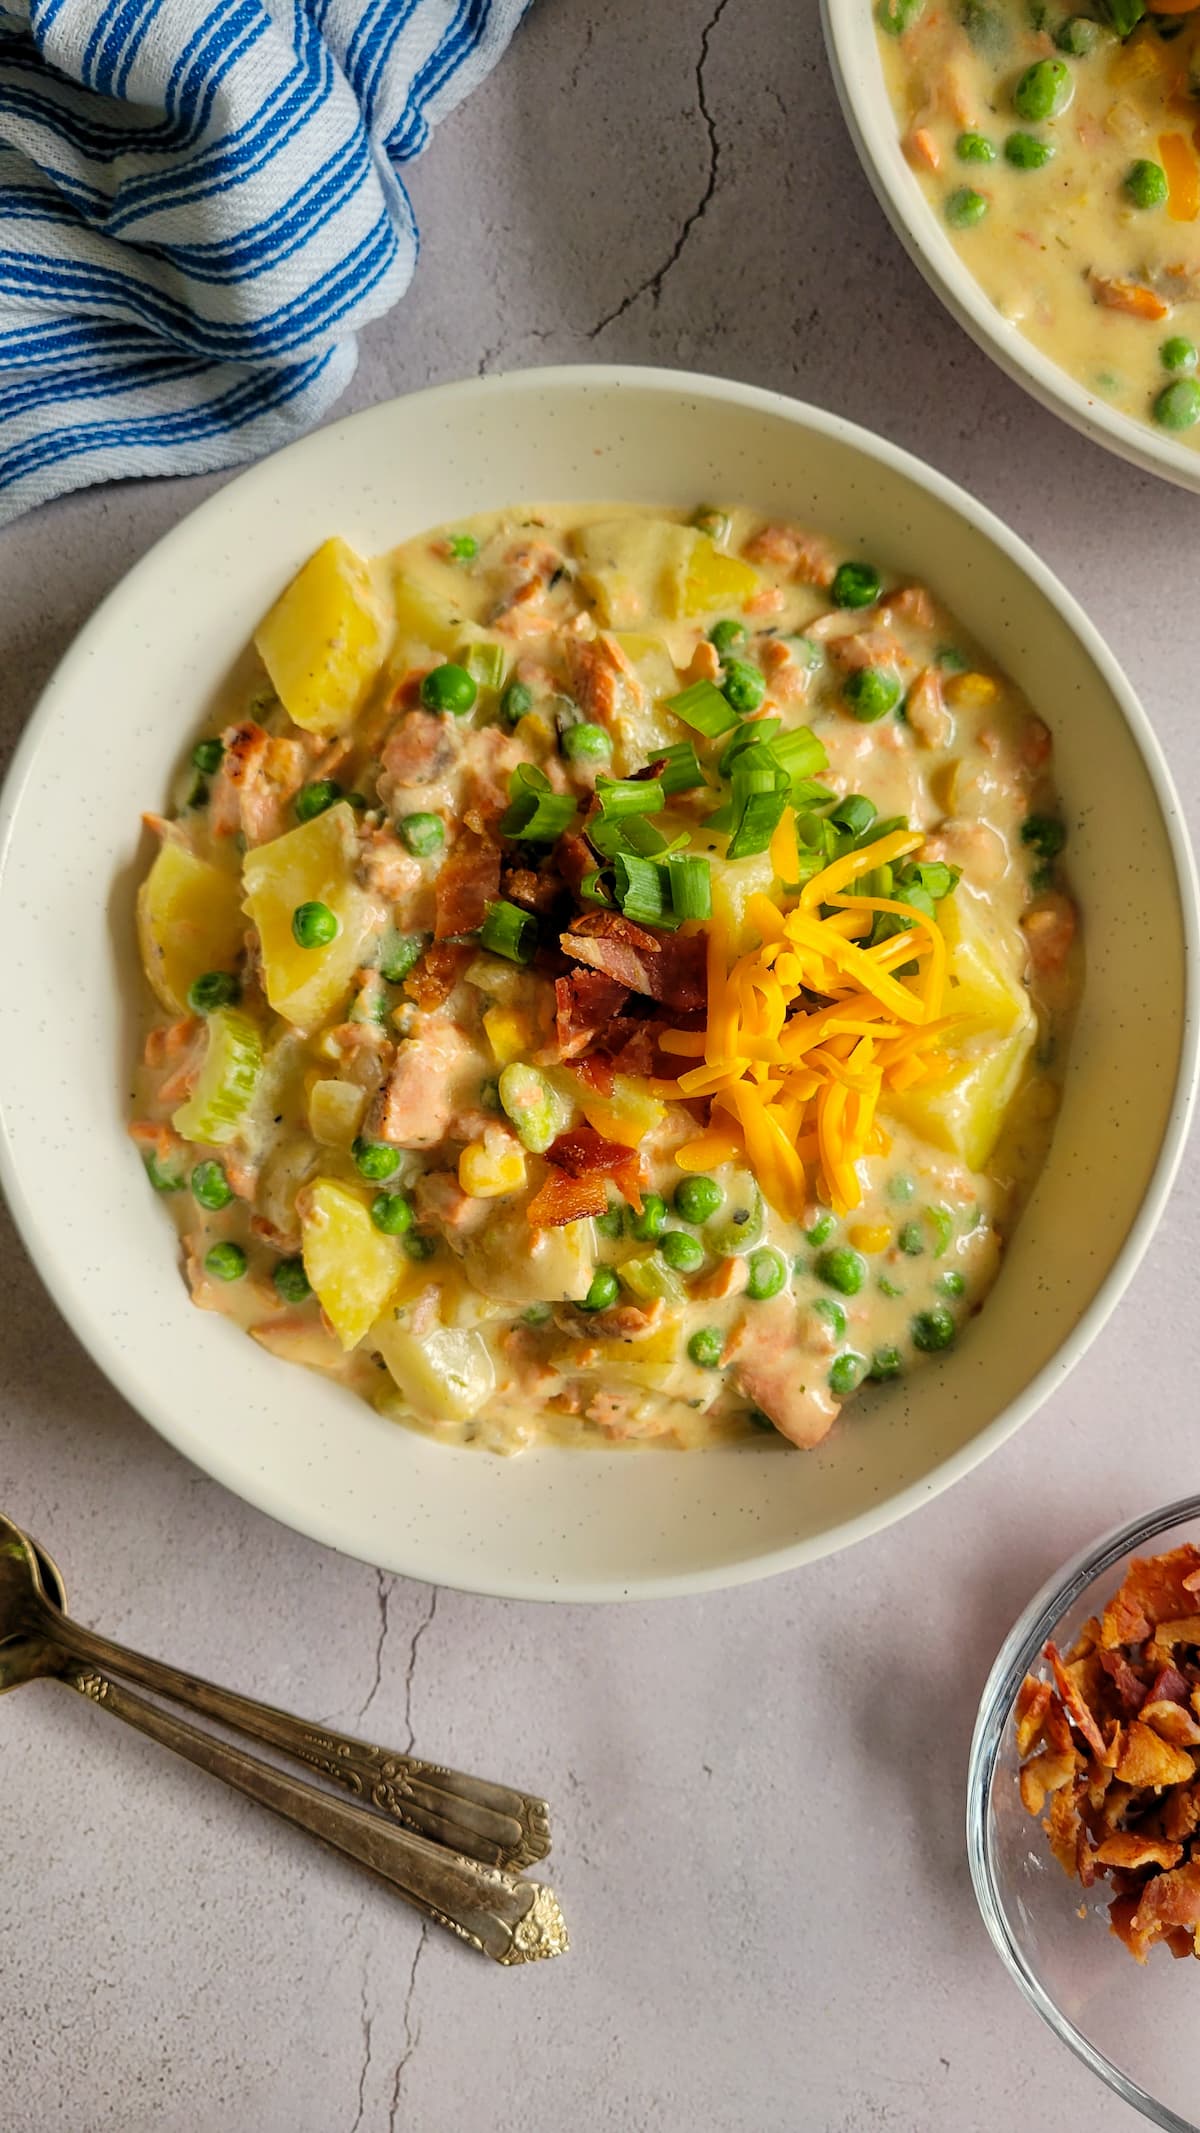 bowl of salmon chowder with potatoes, bacon, green onions and cheddar